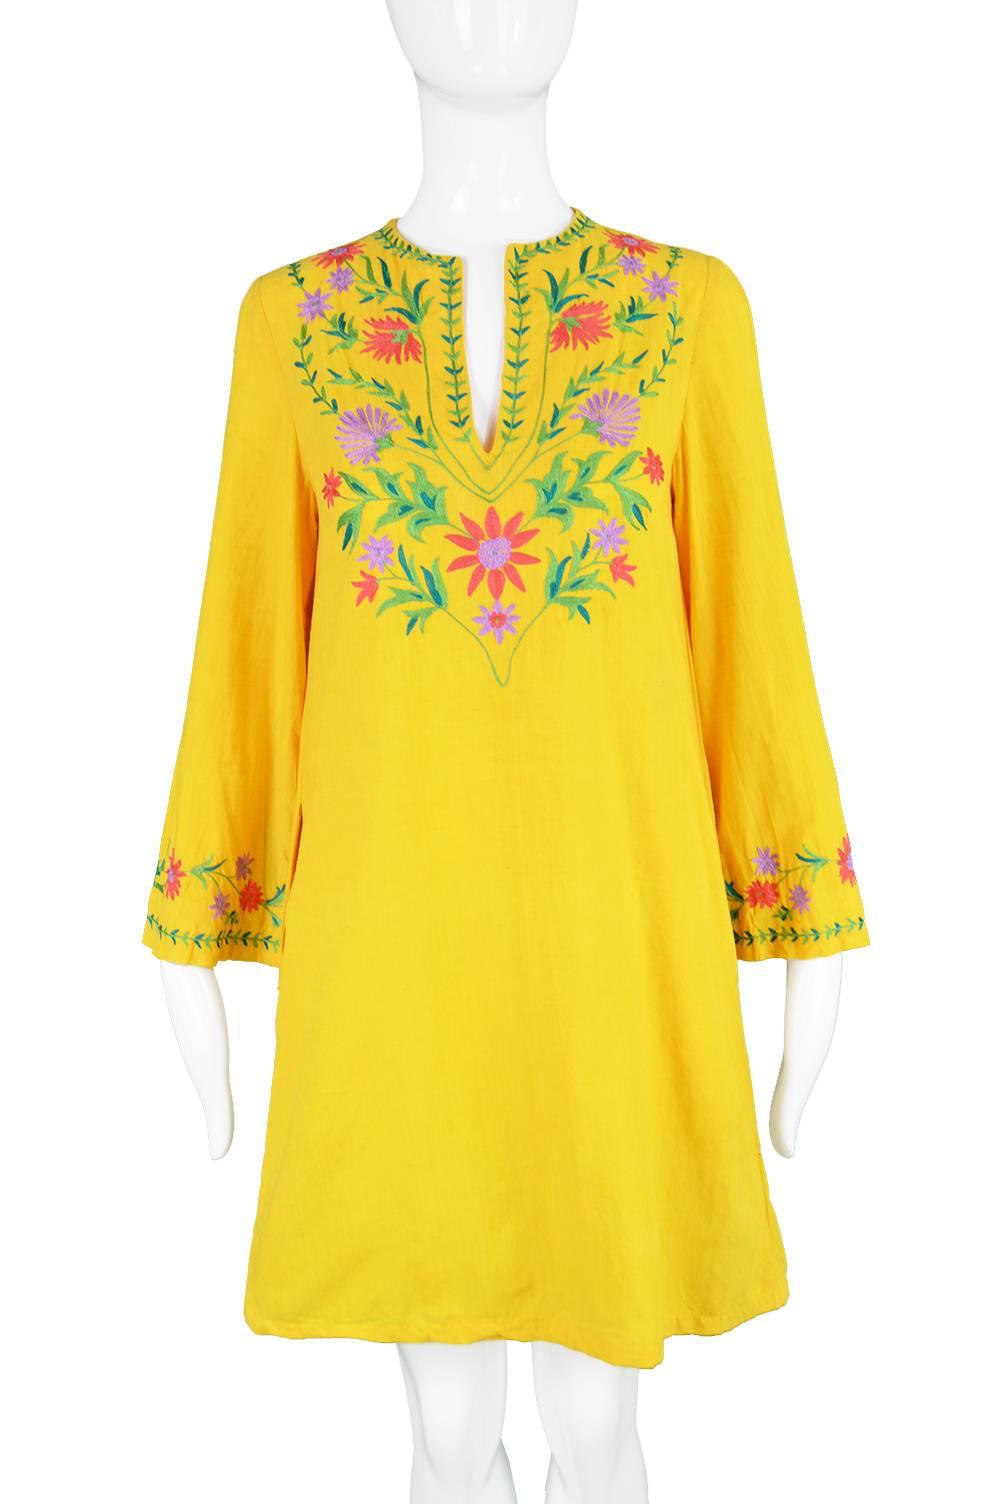 Treacy Lowe Mustard Yellow Hand Embroidered Indian Cotton Mini Dress, 1970s In Excellent Condition For Sale In Doncaster, South Yorkshire